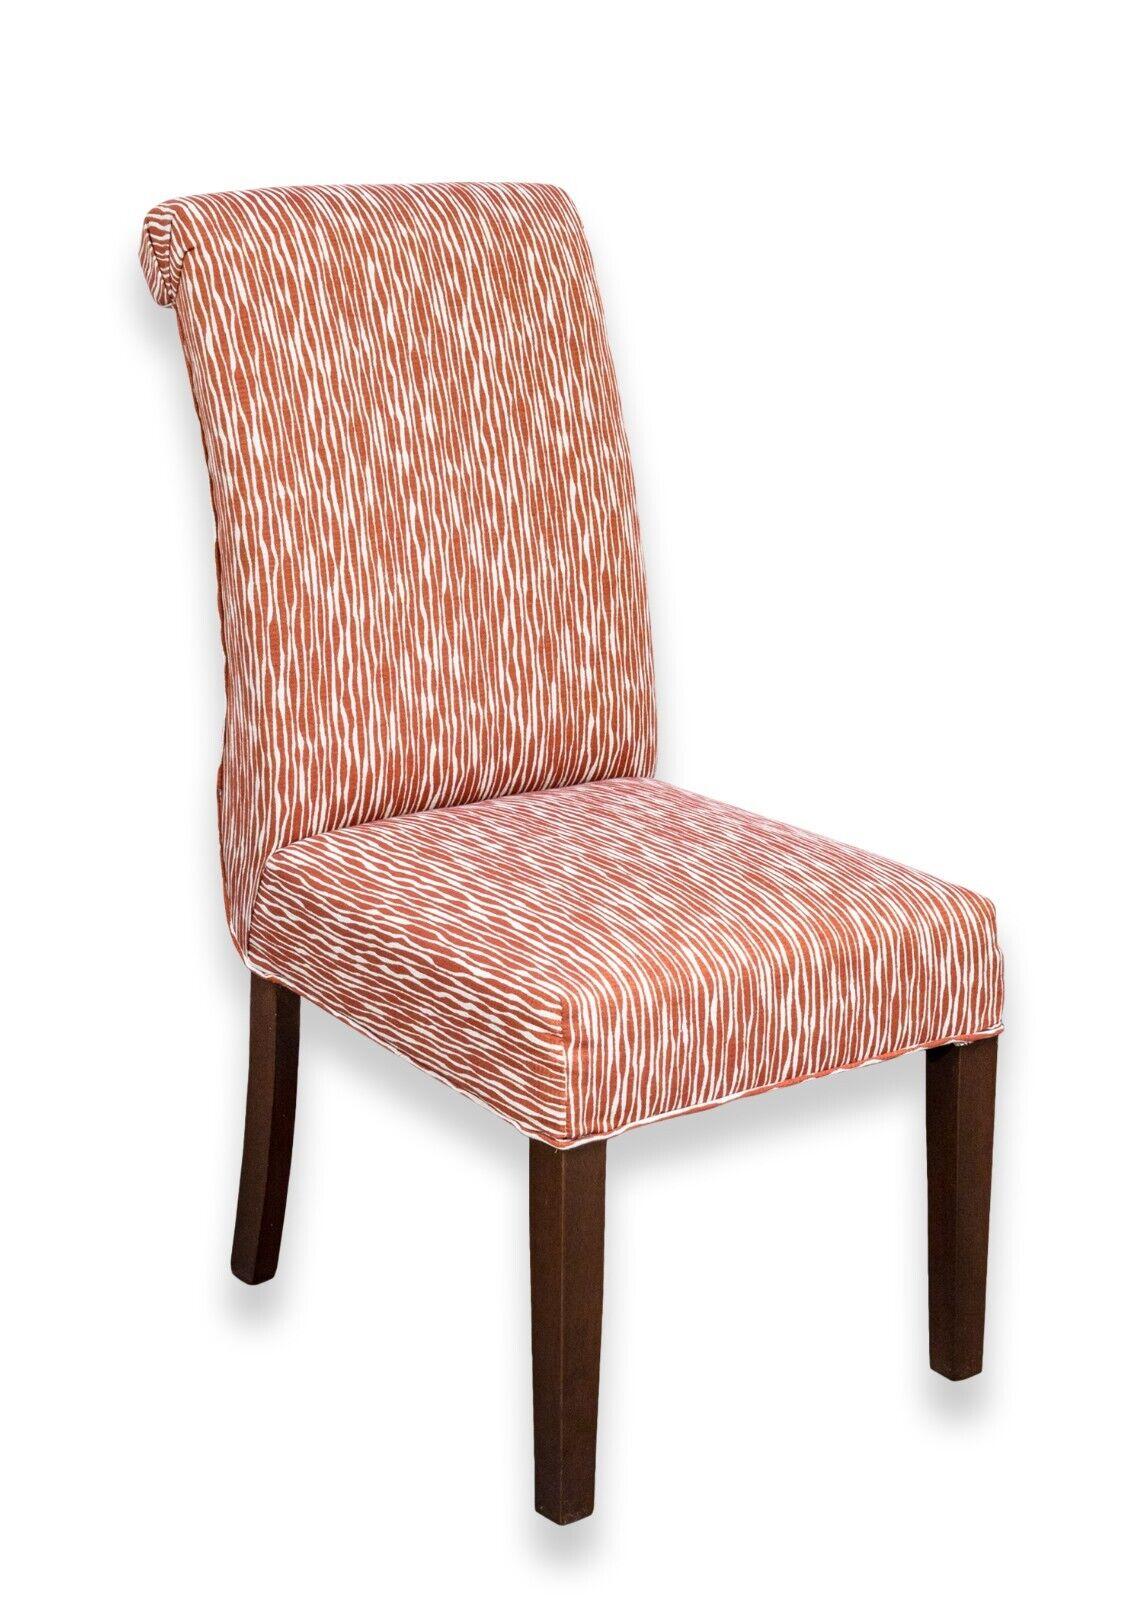 Set of 8 Orange and White Abstract Striped Print Roll Back Dining Chairs In Good Condition For Sale In Keego Harbor, MI